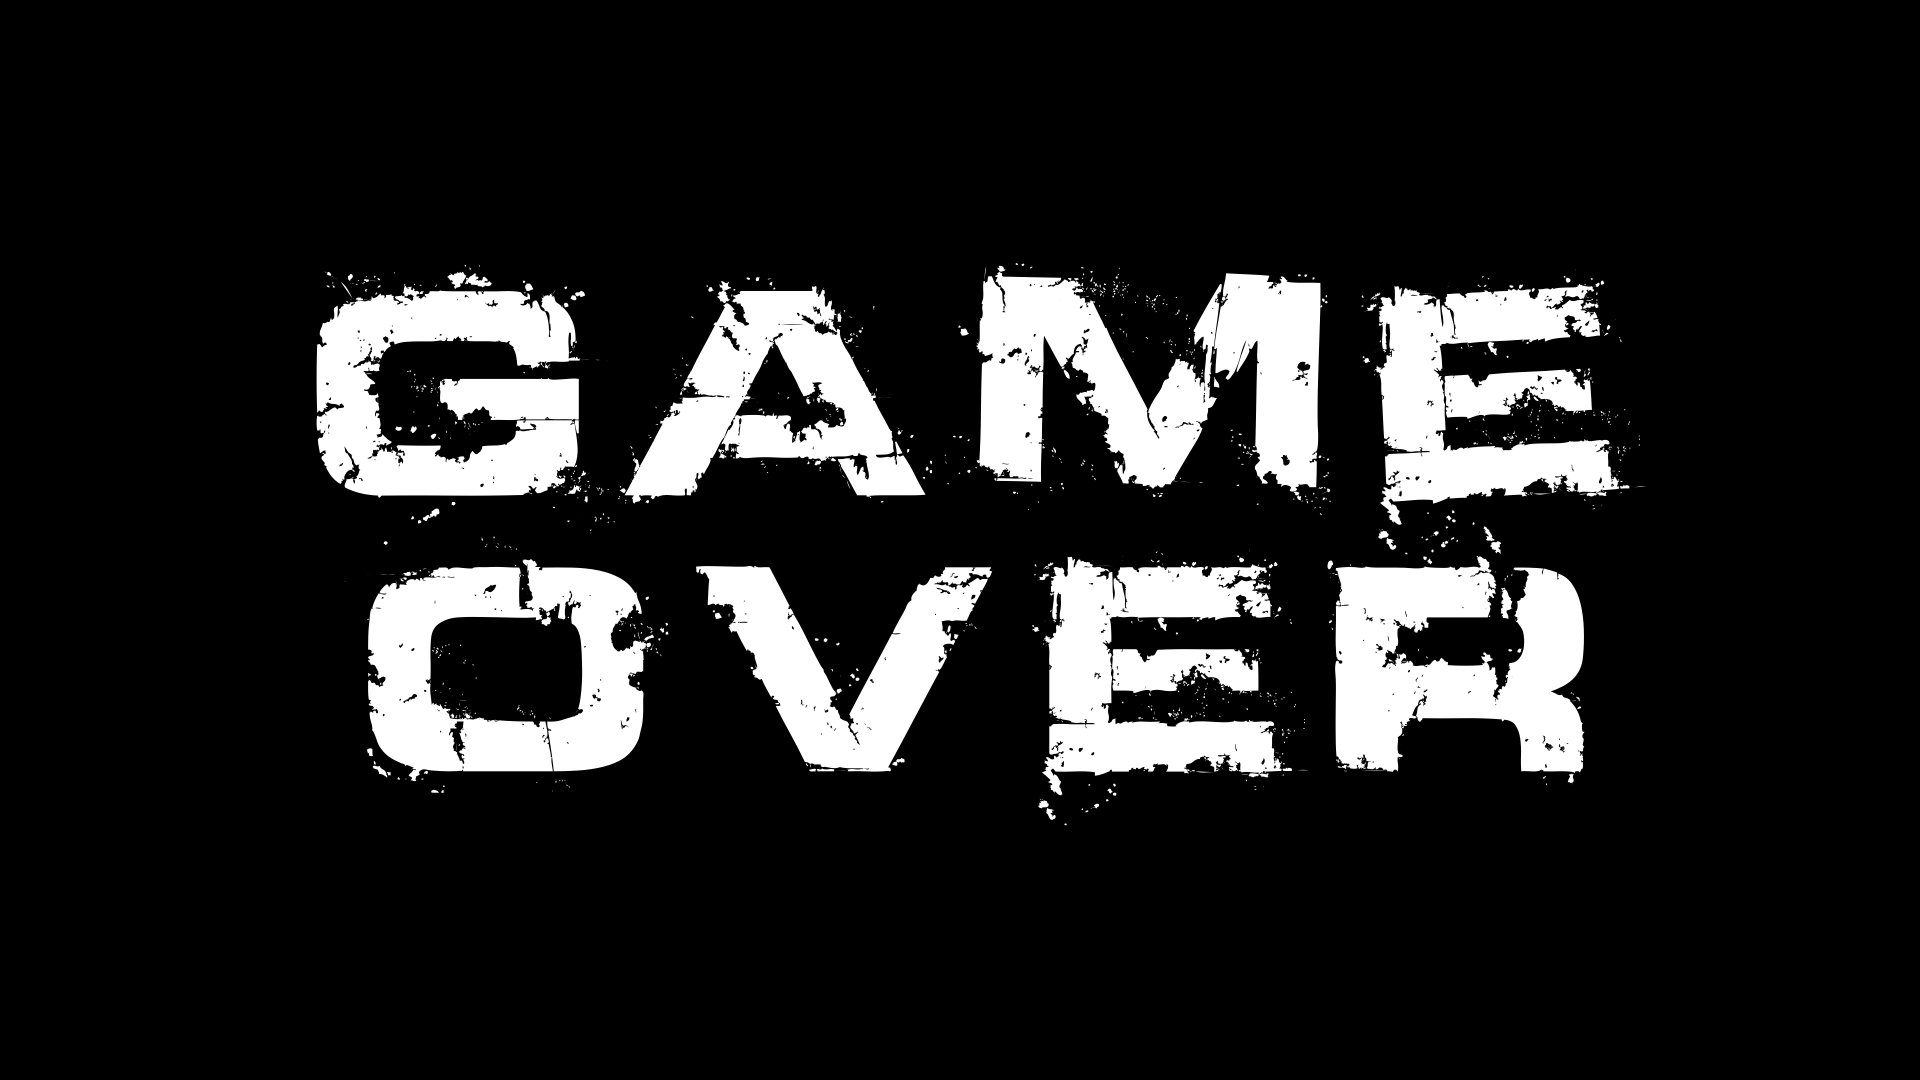 Game over screen. Game over картинка. Надпись game over. Конец игры. Game over в играх.